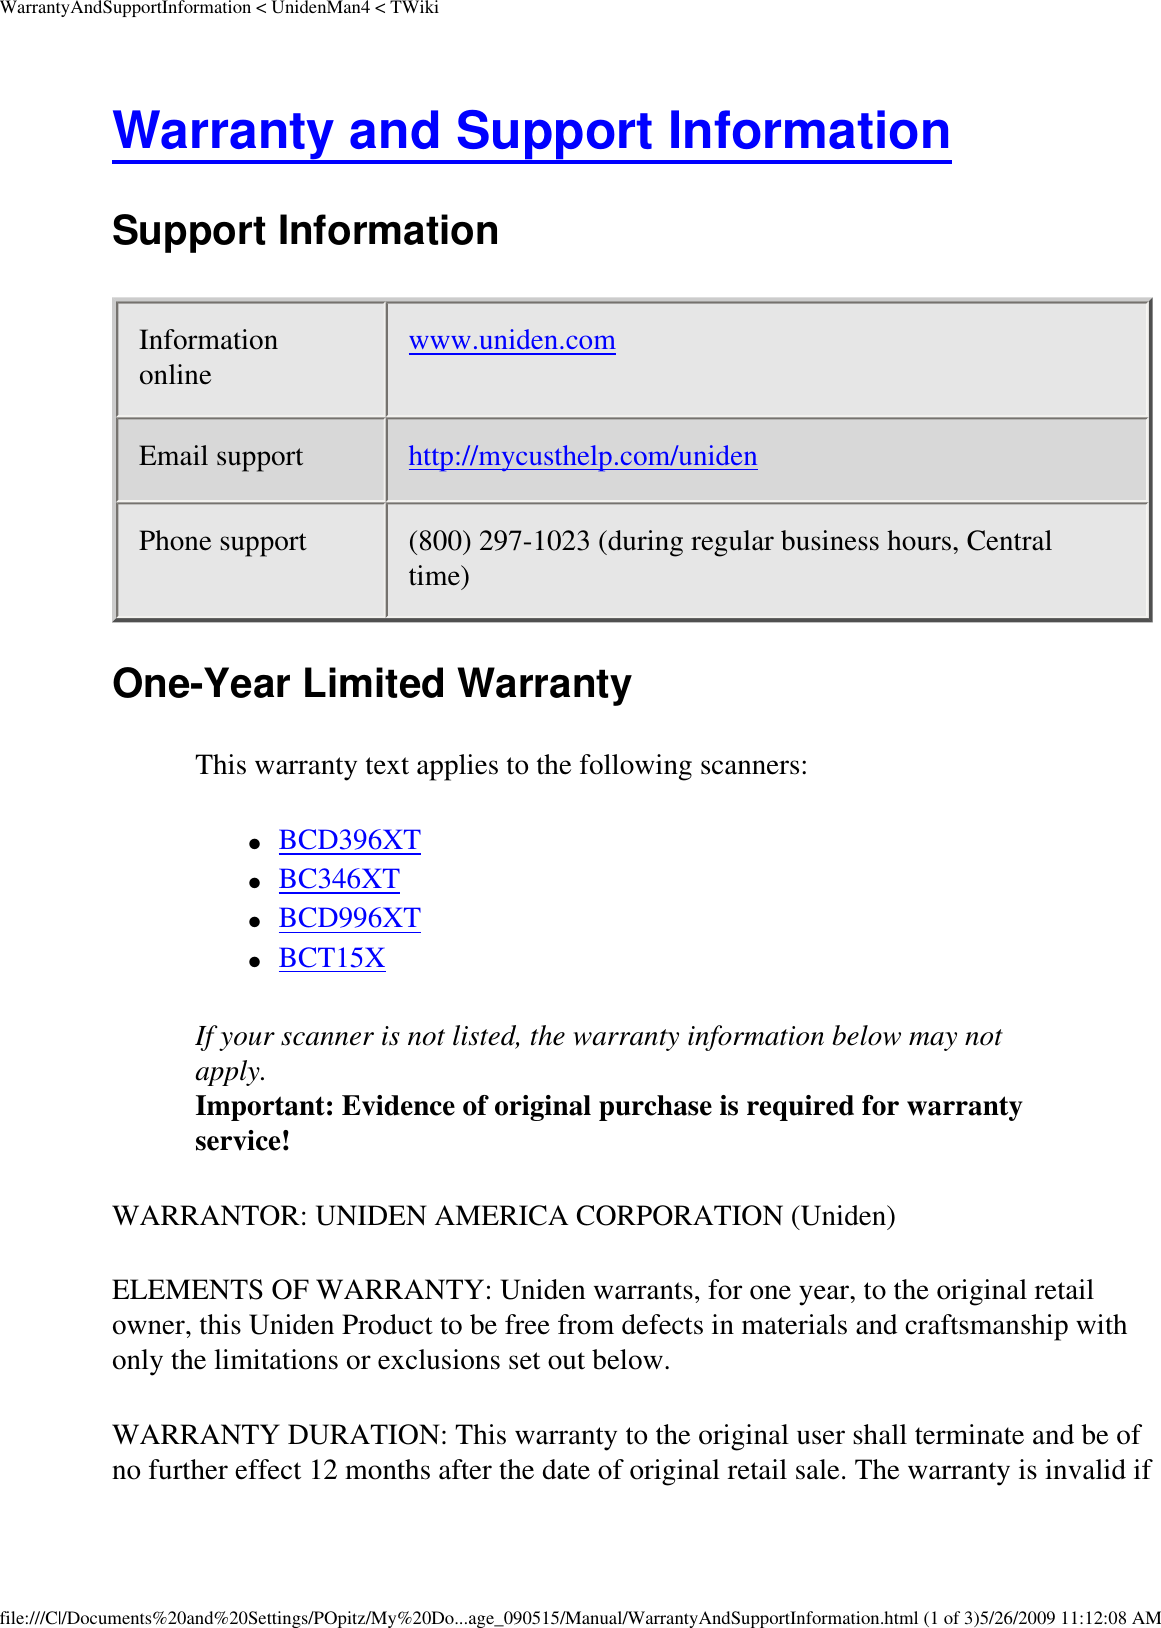 WarrantyAndSupportInformation &lt; UnidenMan4 &lt; TWikiWarranty and Support Information Support Information Information online  www.uniden.com Email support  http://mycusthelp.com/uniden Phone support  (800) 297-1023 (during regular business hours, Central time) One-Year Limited Warranty This warranty text applies to the following scanners: ●     BCD396XT ●     BC346XT ●     BCD996XT ●     BCT15X If your scanner is not listed, the warranty information below may not apply.  Important: Evidence of original purchase is required for warranty service! WARRANTOR: UNIDEN AMERICA CORPORATION (Uniden) ELEMENTS OF WARRANTY: Uniden warrants, for one year, to the original retail owner, this Uniden Product to be free from defects in materials and craftsmanship with only the limitations or exclusions set out below. WARRANTY DURATION: This warranty to the original user shall terminate and be of no further effect 12 months after the date of original retail sale. The warranty is invalid if file:///C|/Documents%20and%20Settings/POpitz/My%20Do...age_090515/Manual/WarrantyAndSupportInformation.html (1 of 3)5/26/2009 11:12:08 AM